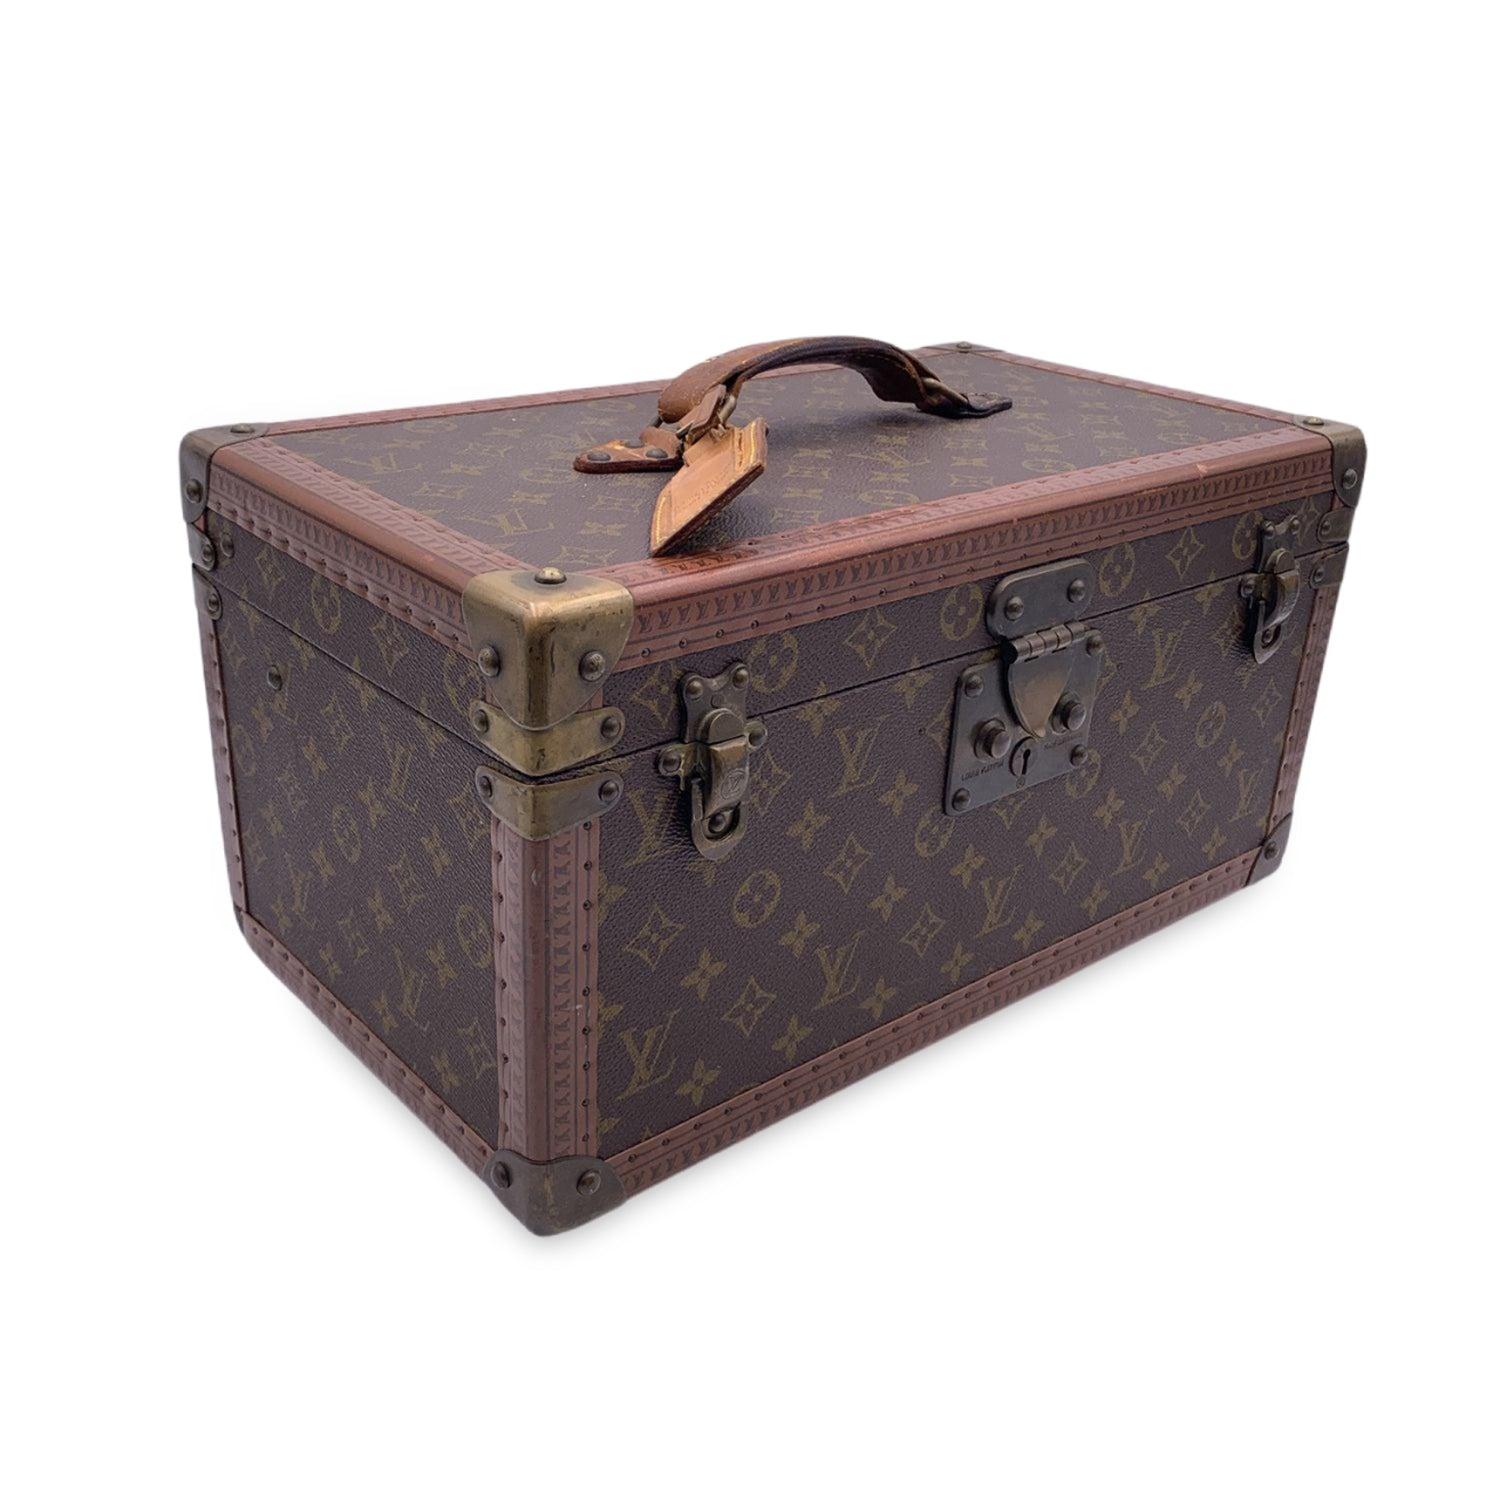 Splendid Louis Vuitton monogram 'Boite Bouteille et Glace' (also called 'Bottle and Ice box') cosmetic travel trunk/case, mod. M21822, from the 70s. Made with timeless monogram canvas with leather handle, golden brass pieces and Leather trim with